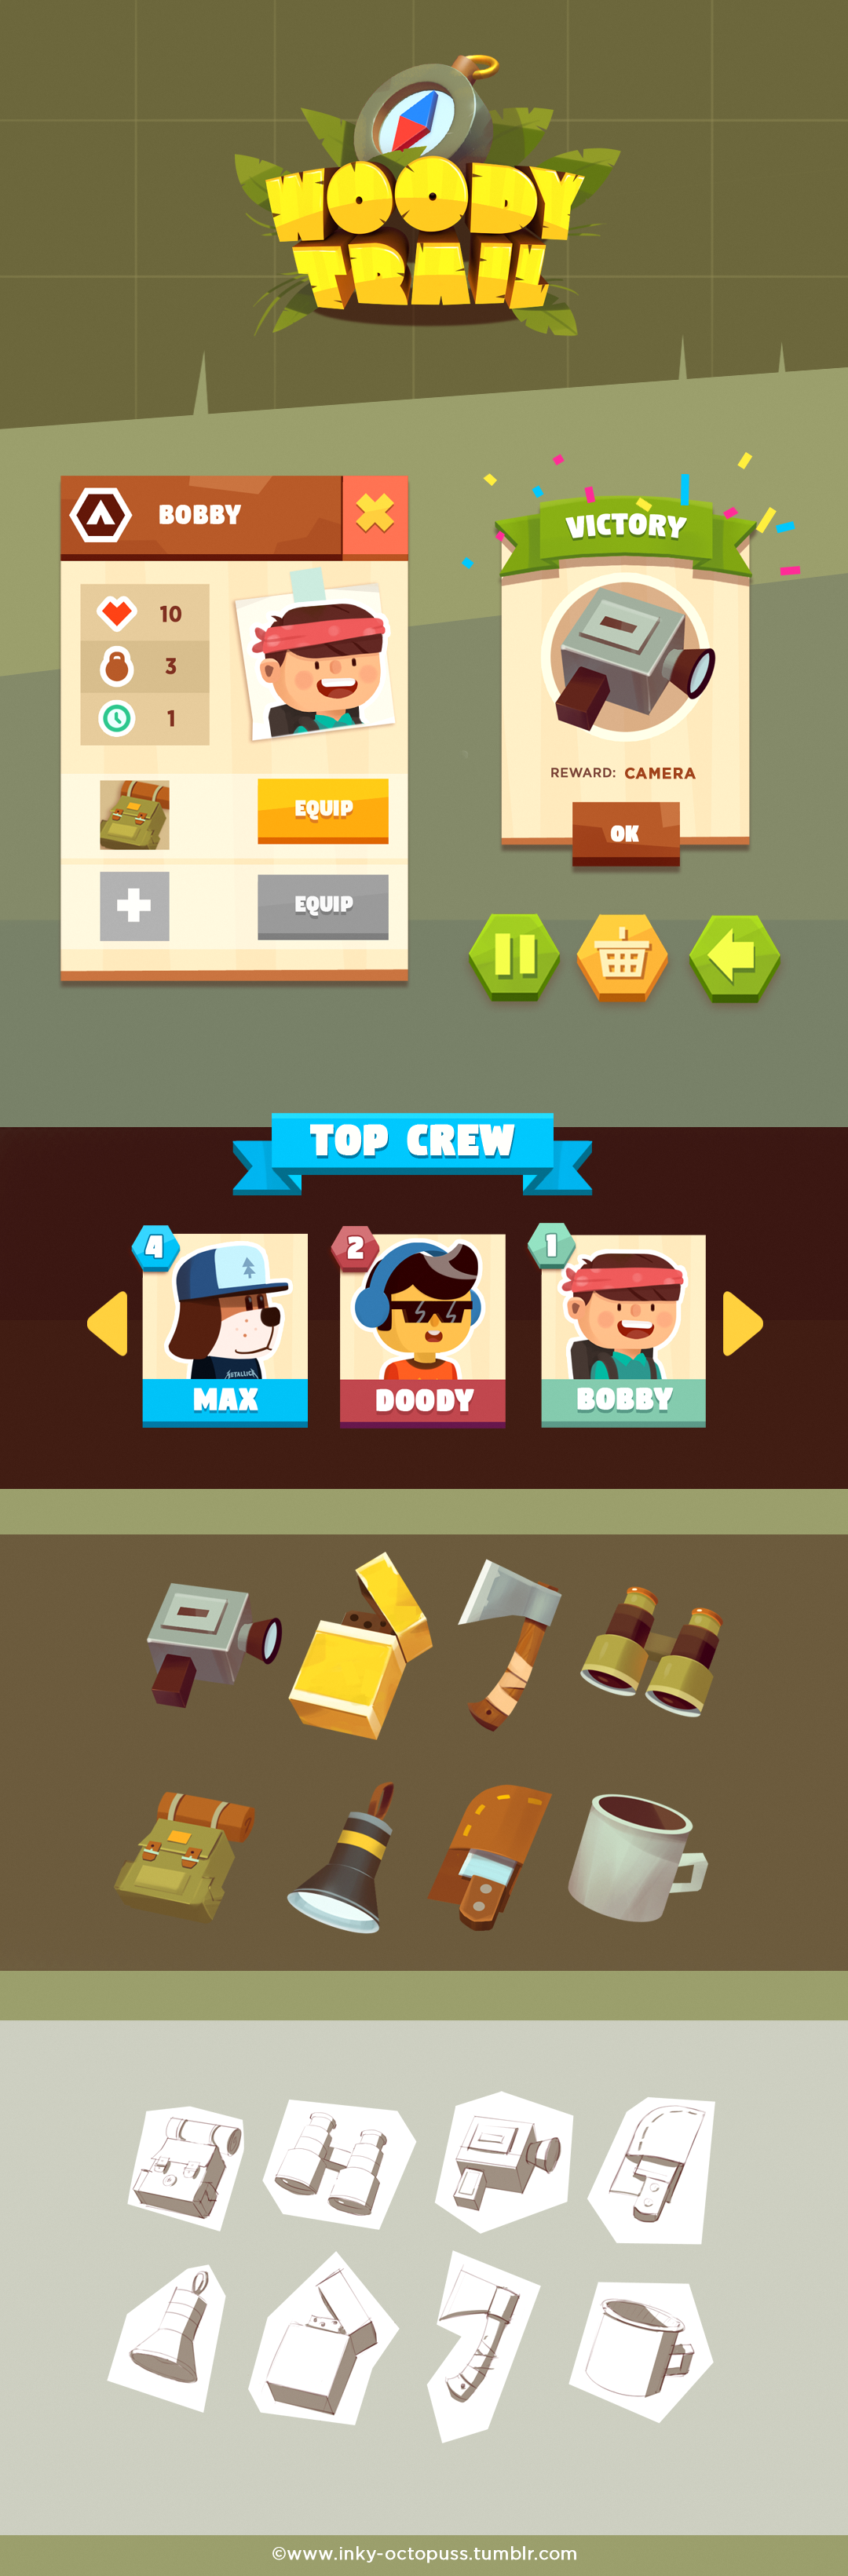 UI mobile ui kit mobile games scout adventure icons cards characters